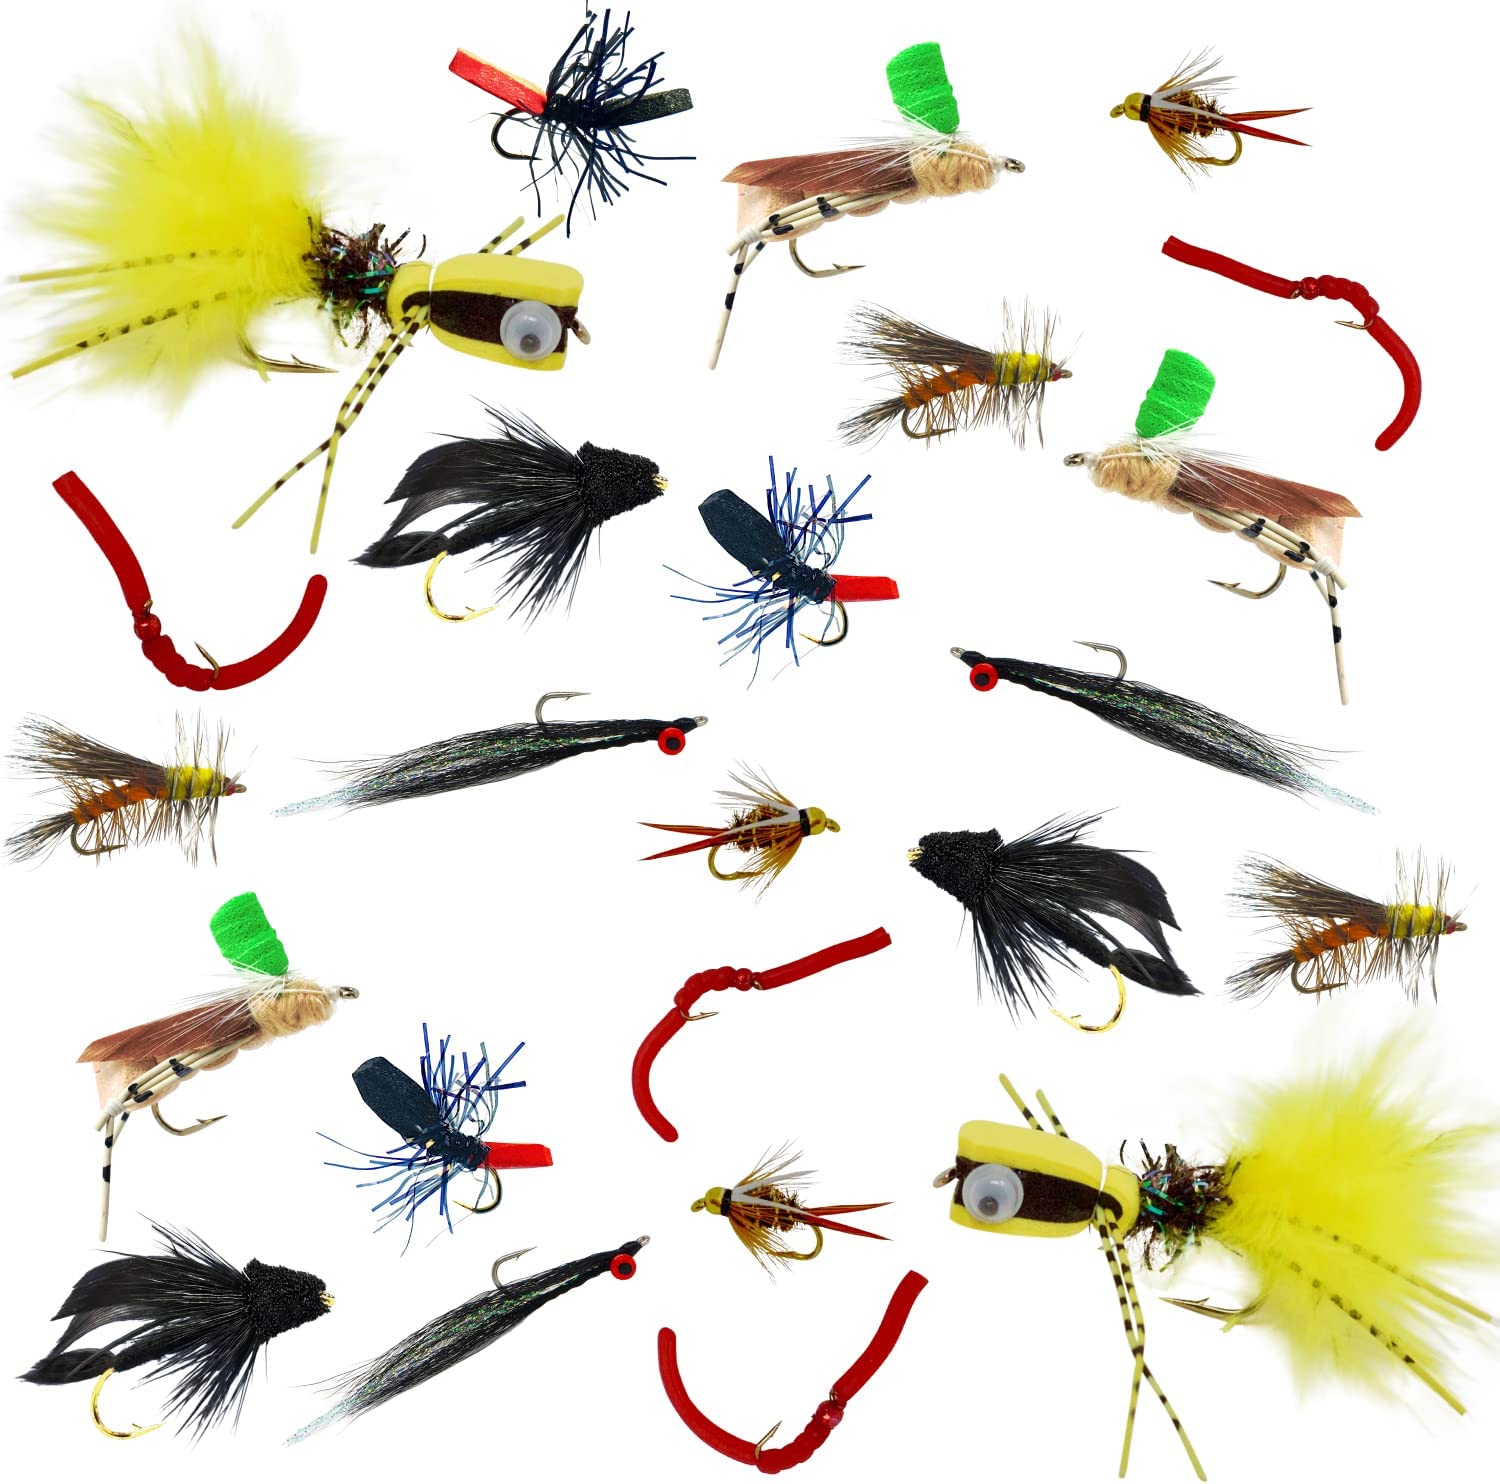 24 Pc Fly Fishing Set for Panfish Trout an Dry Flies Nymphs Fly